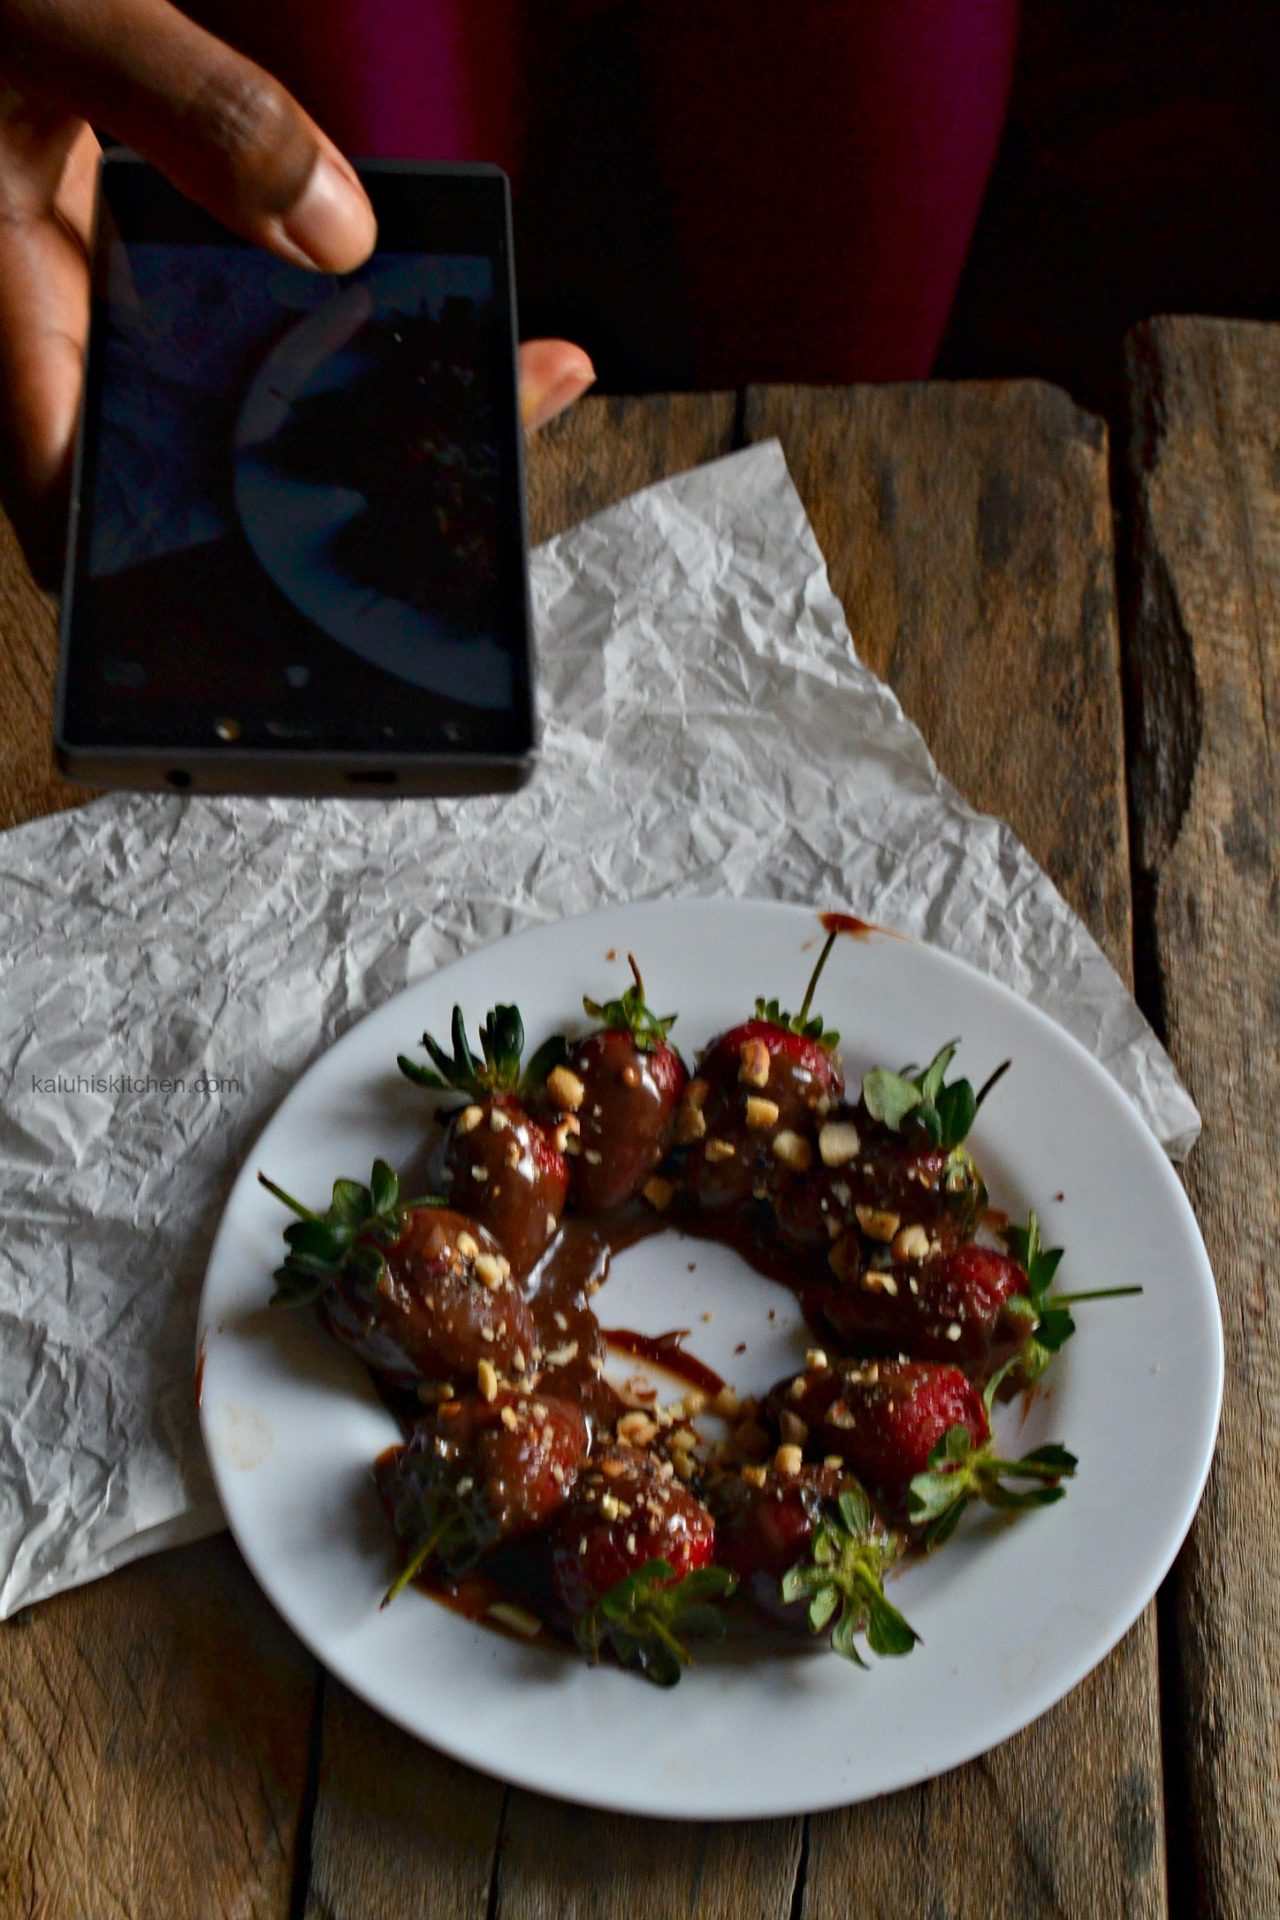 Top kenyan food blogger_how to make chocolate covered strawberries laced with some red wine_kaluhiskitchen.com